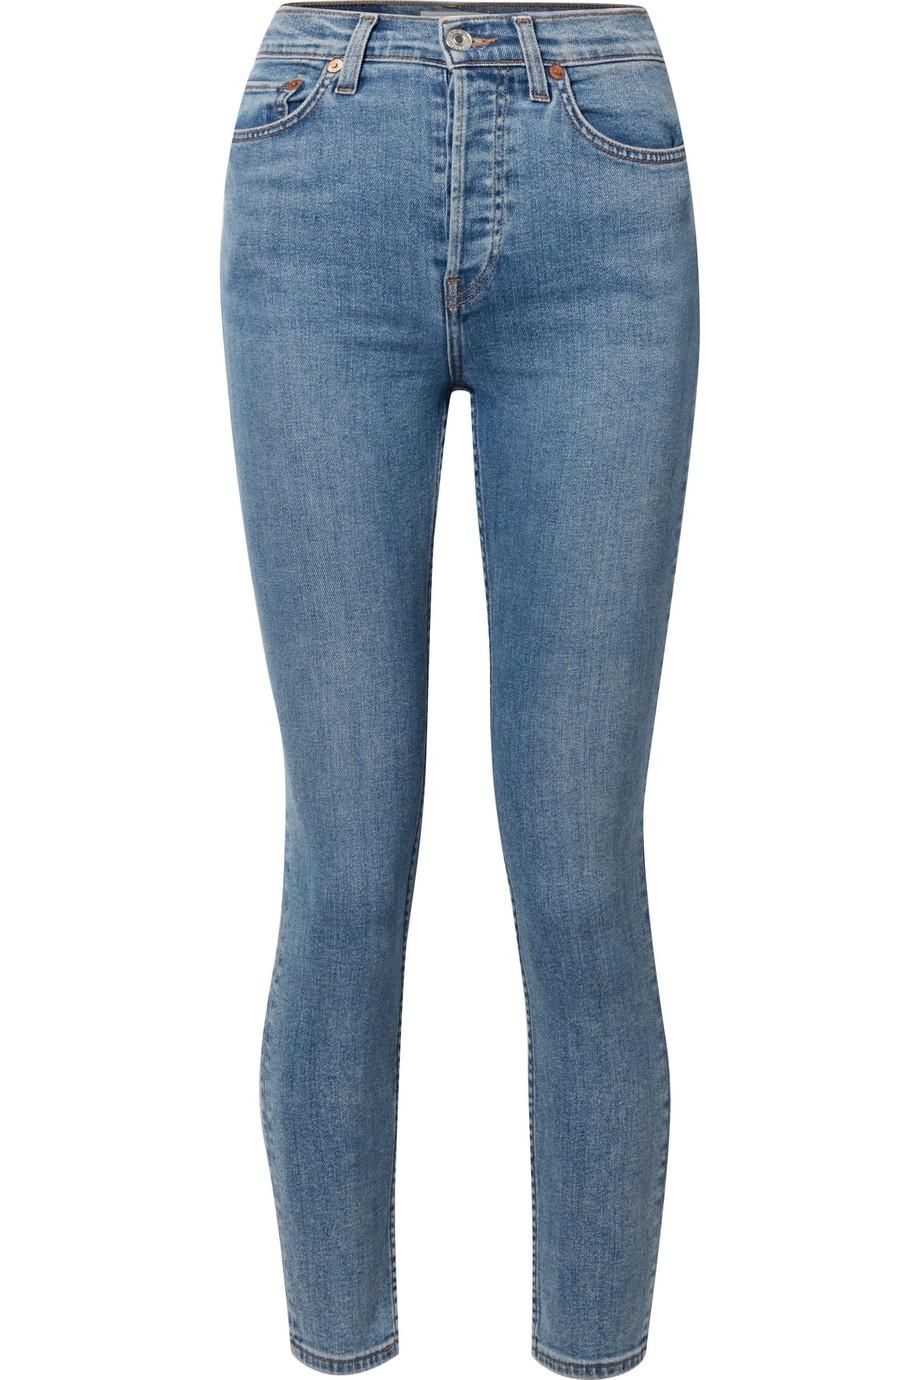 These Are the Best Skinny Jeans on the Planet | Who What Wear